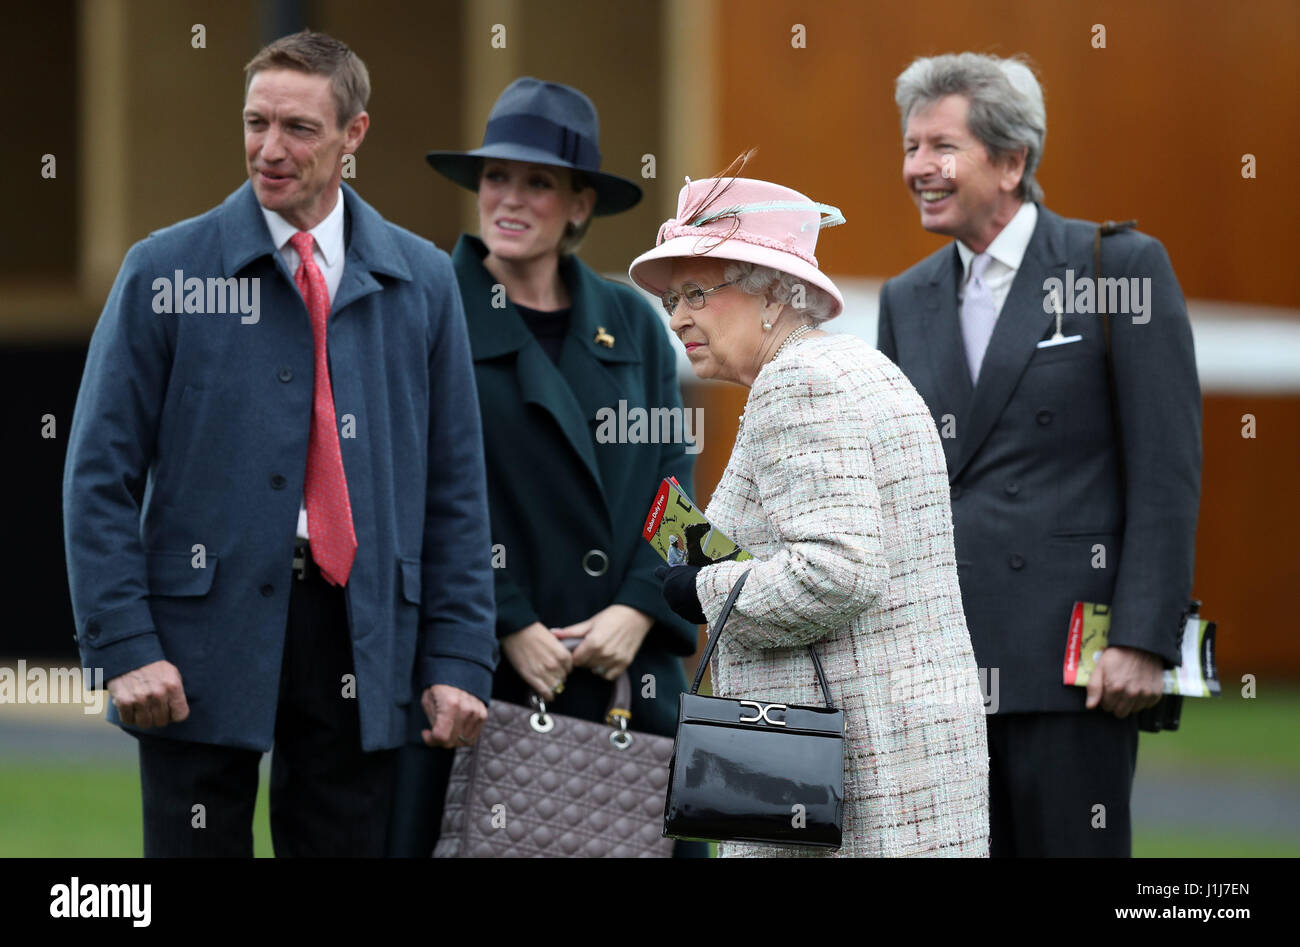 Queen Elizabeth II with her Bloodstock and Racing Advisor John Warren (right) and Richard Hughes (left) as she attends the Dubai Duty Free Spring Trials and Beer Festival at Newbury Racecourse in Newbury, on her 91st birthday. Stock Photo